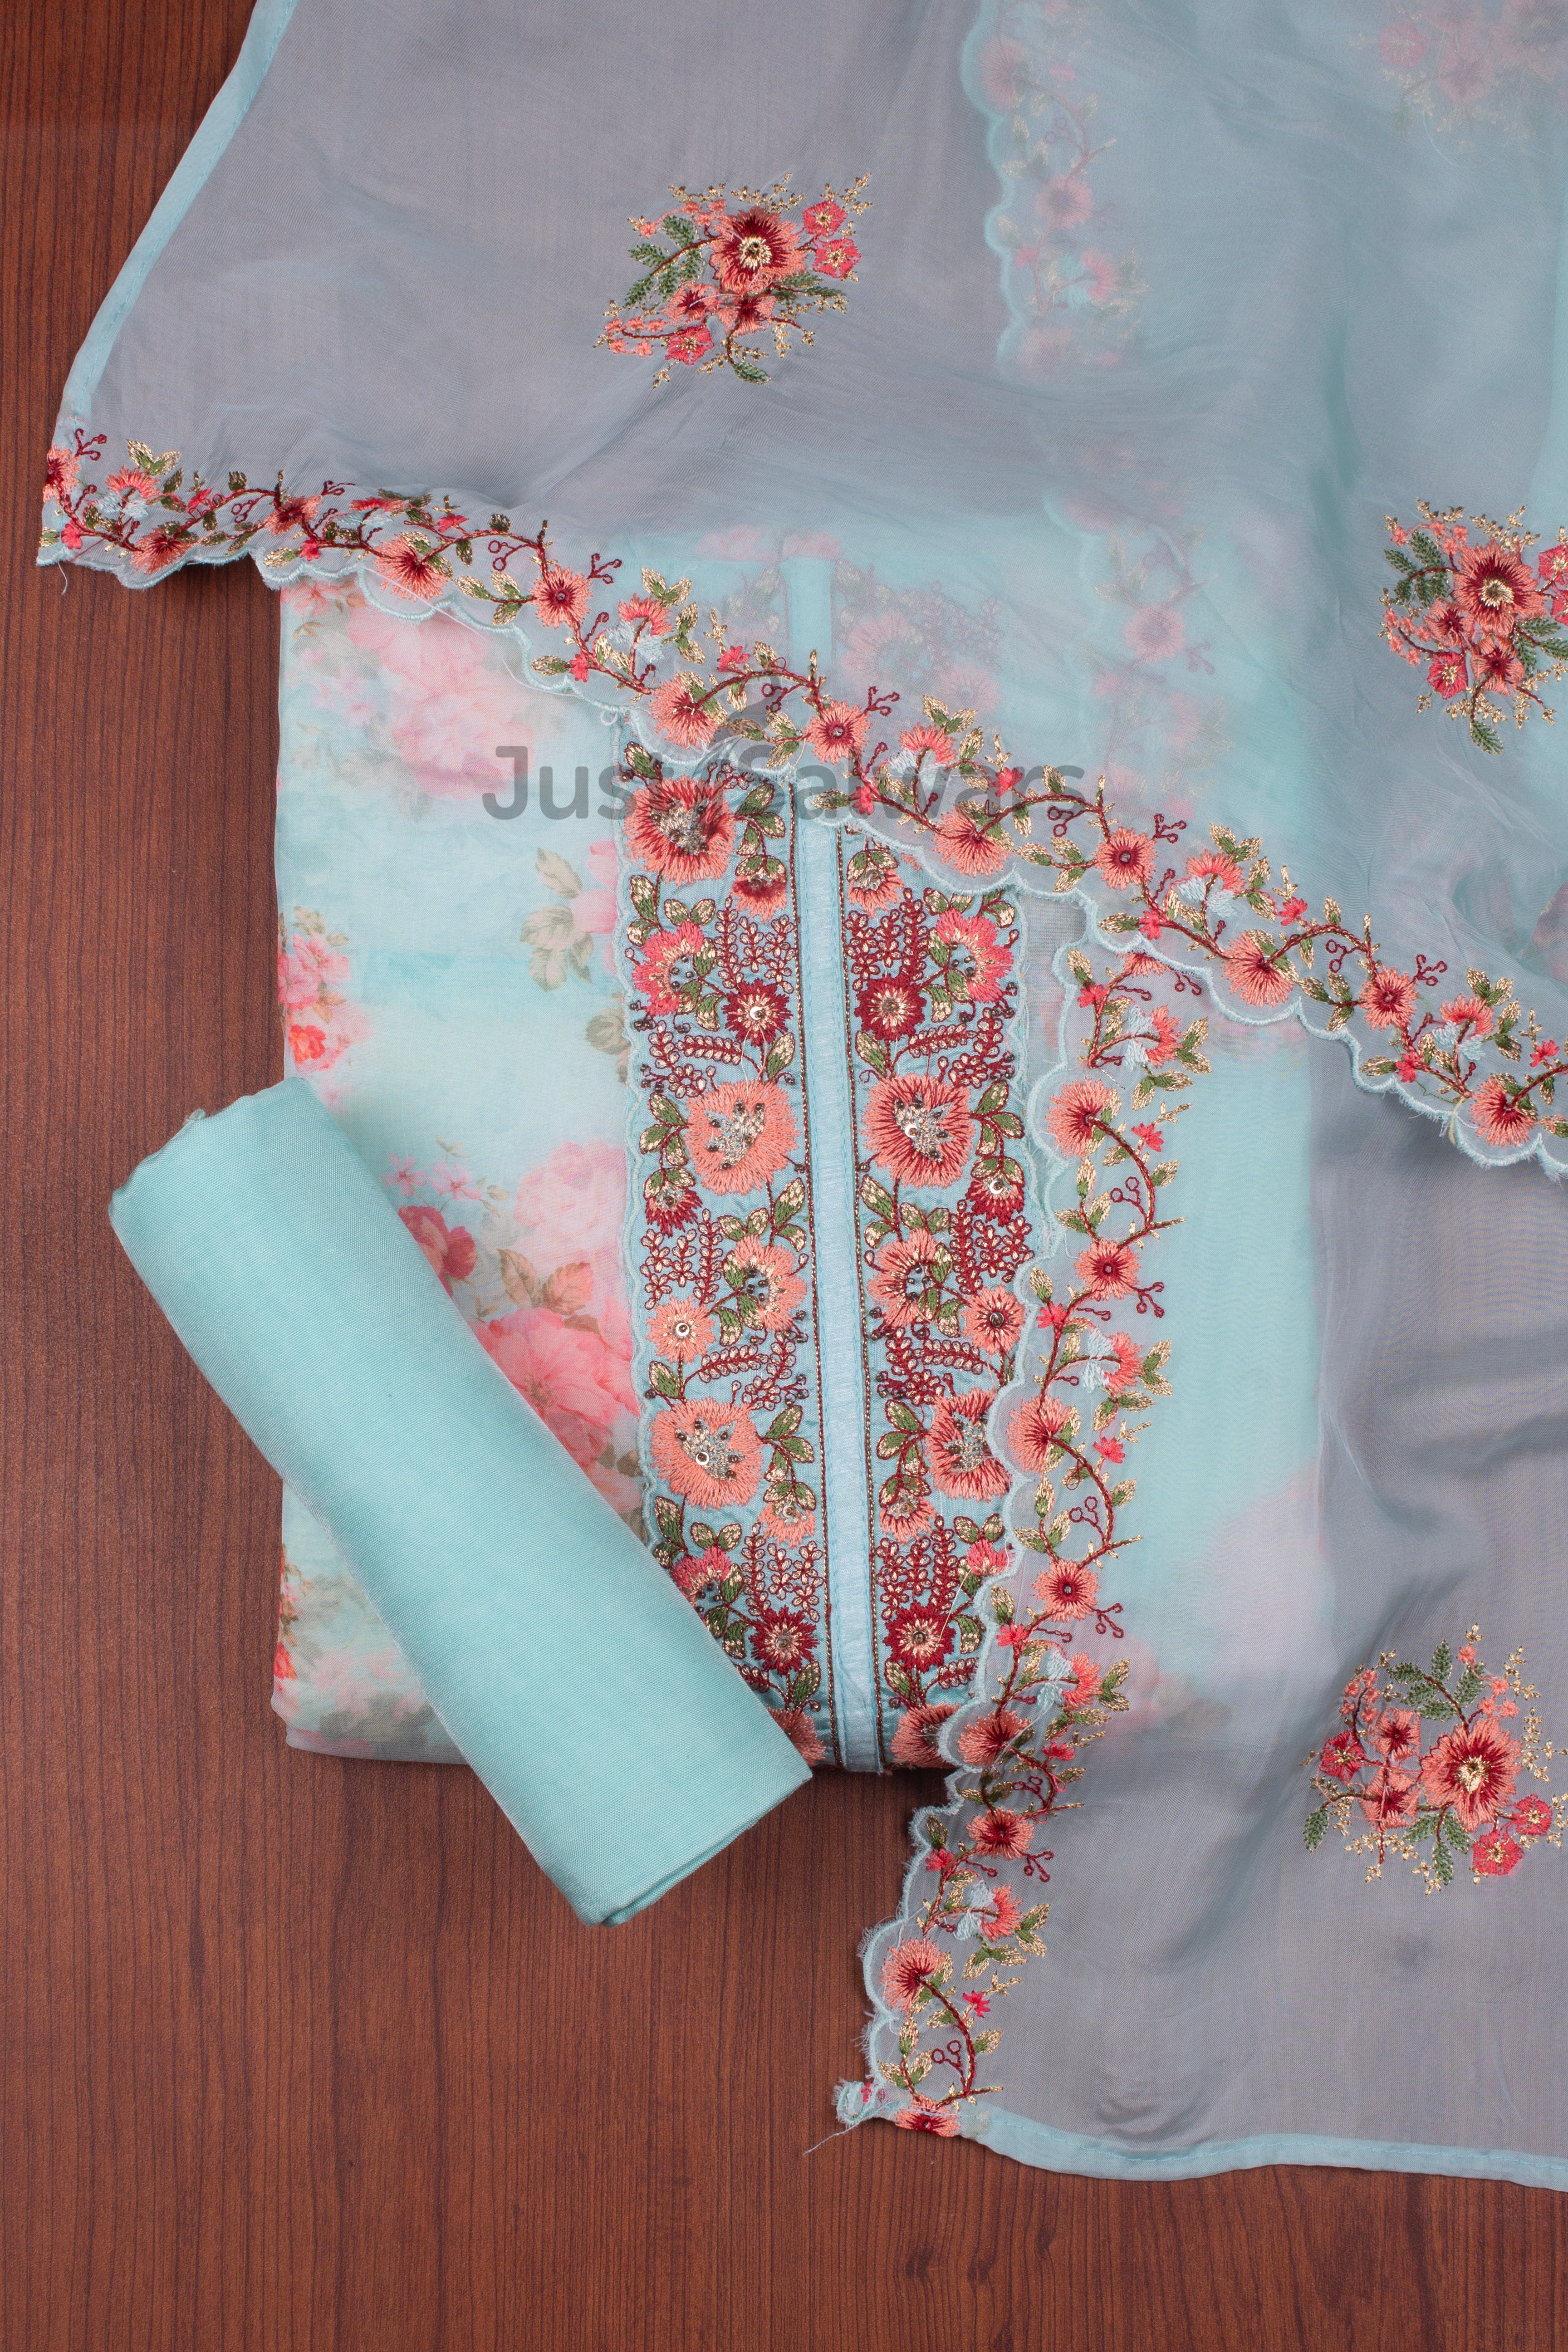 Sky Blue Colour Unstitched Dress Material -Dress Material- Just Salwars